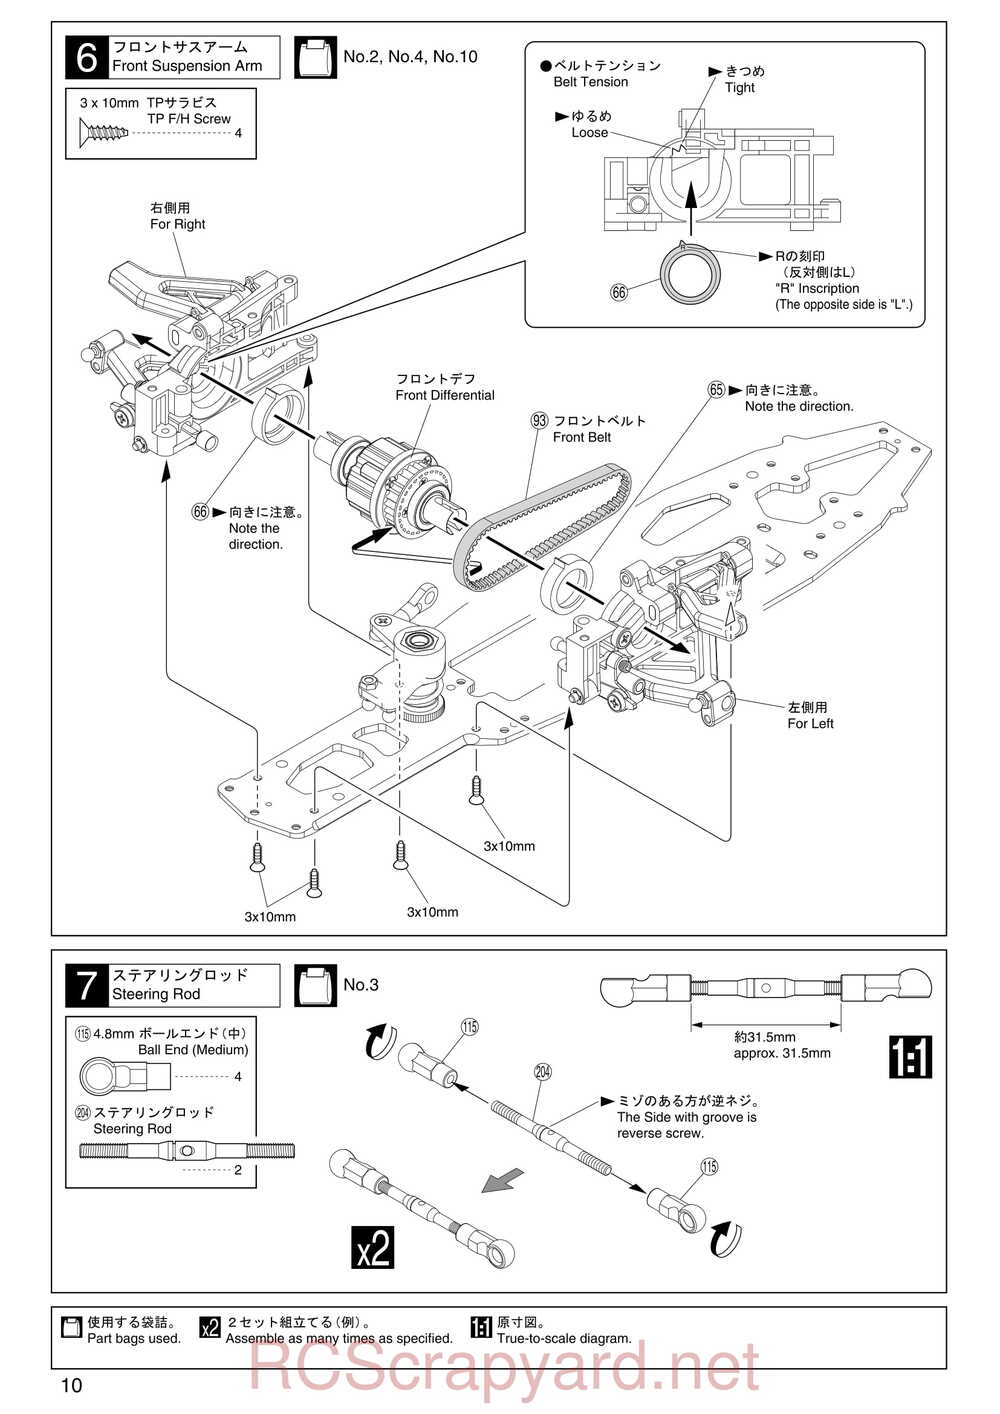 Kyosho - 31257 - V-One RRR Rubber - Manual - Page 10